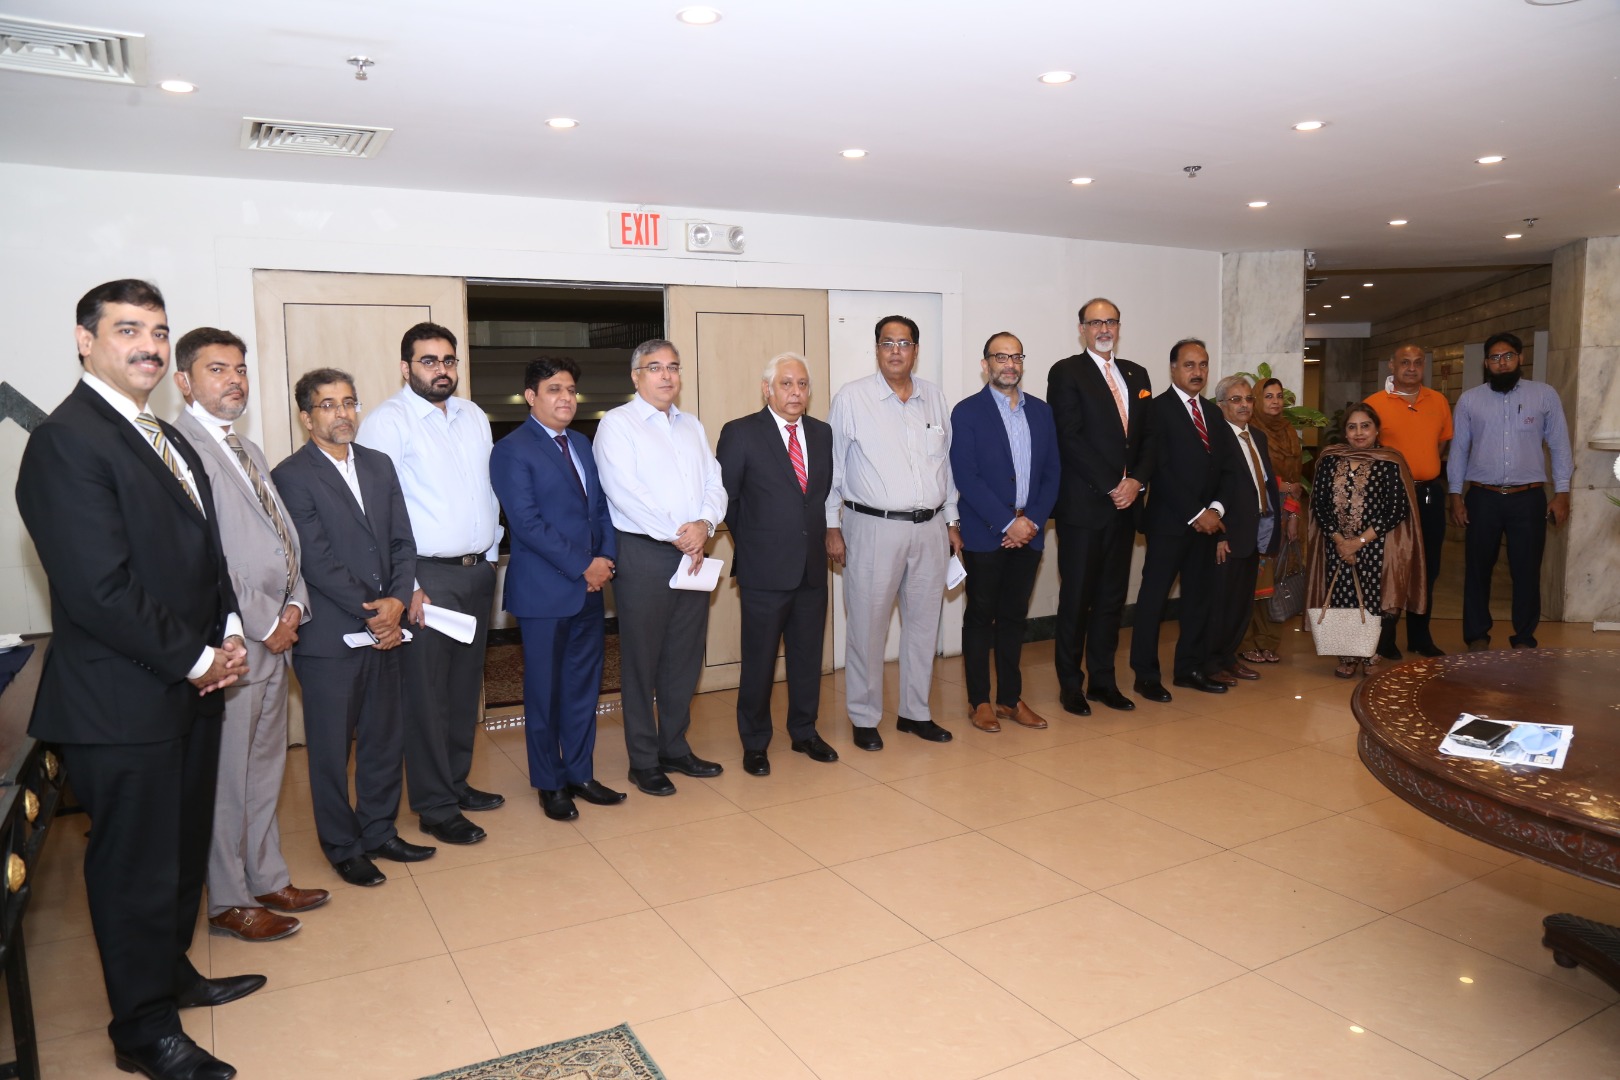 56th Annual General Meeting of PHA was held at Regent Plaza Hotel, Karachi on September 29, 2020